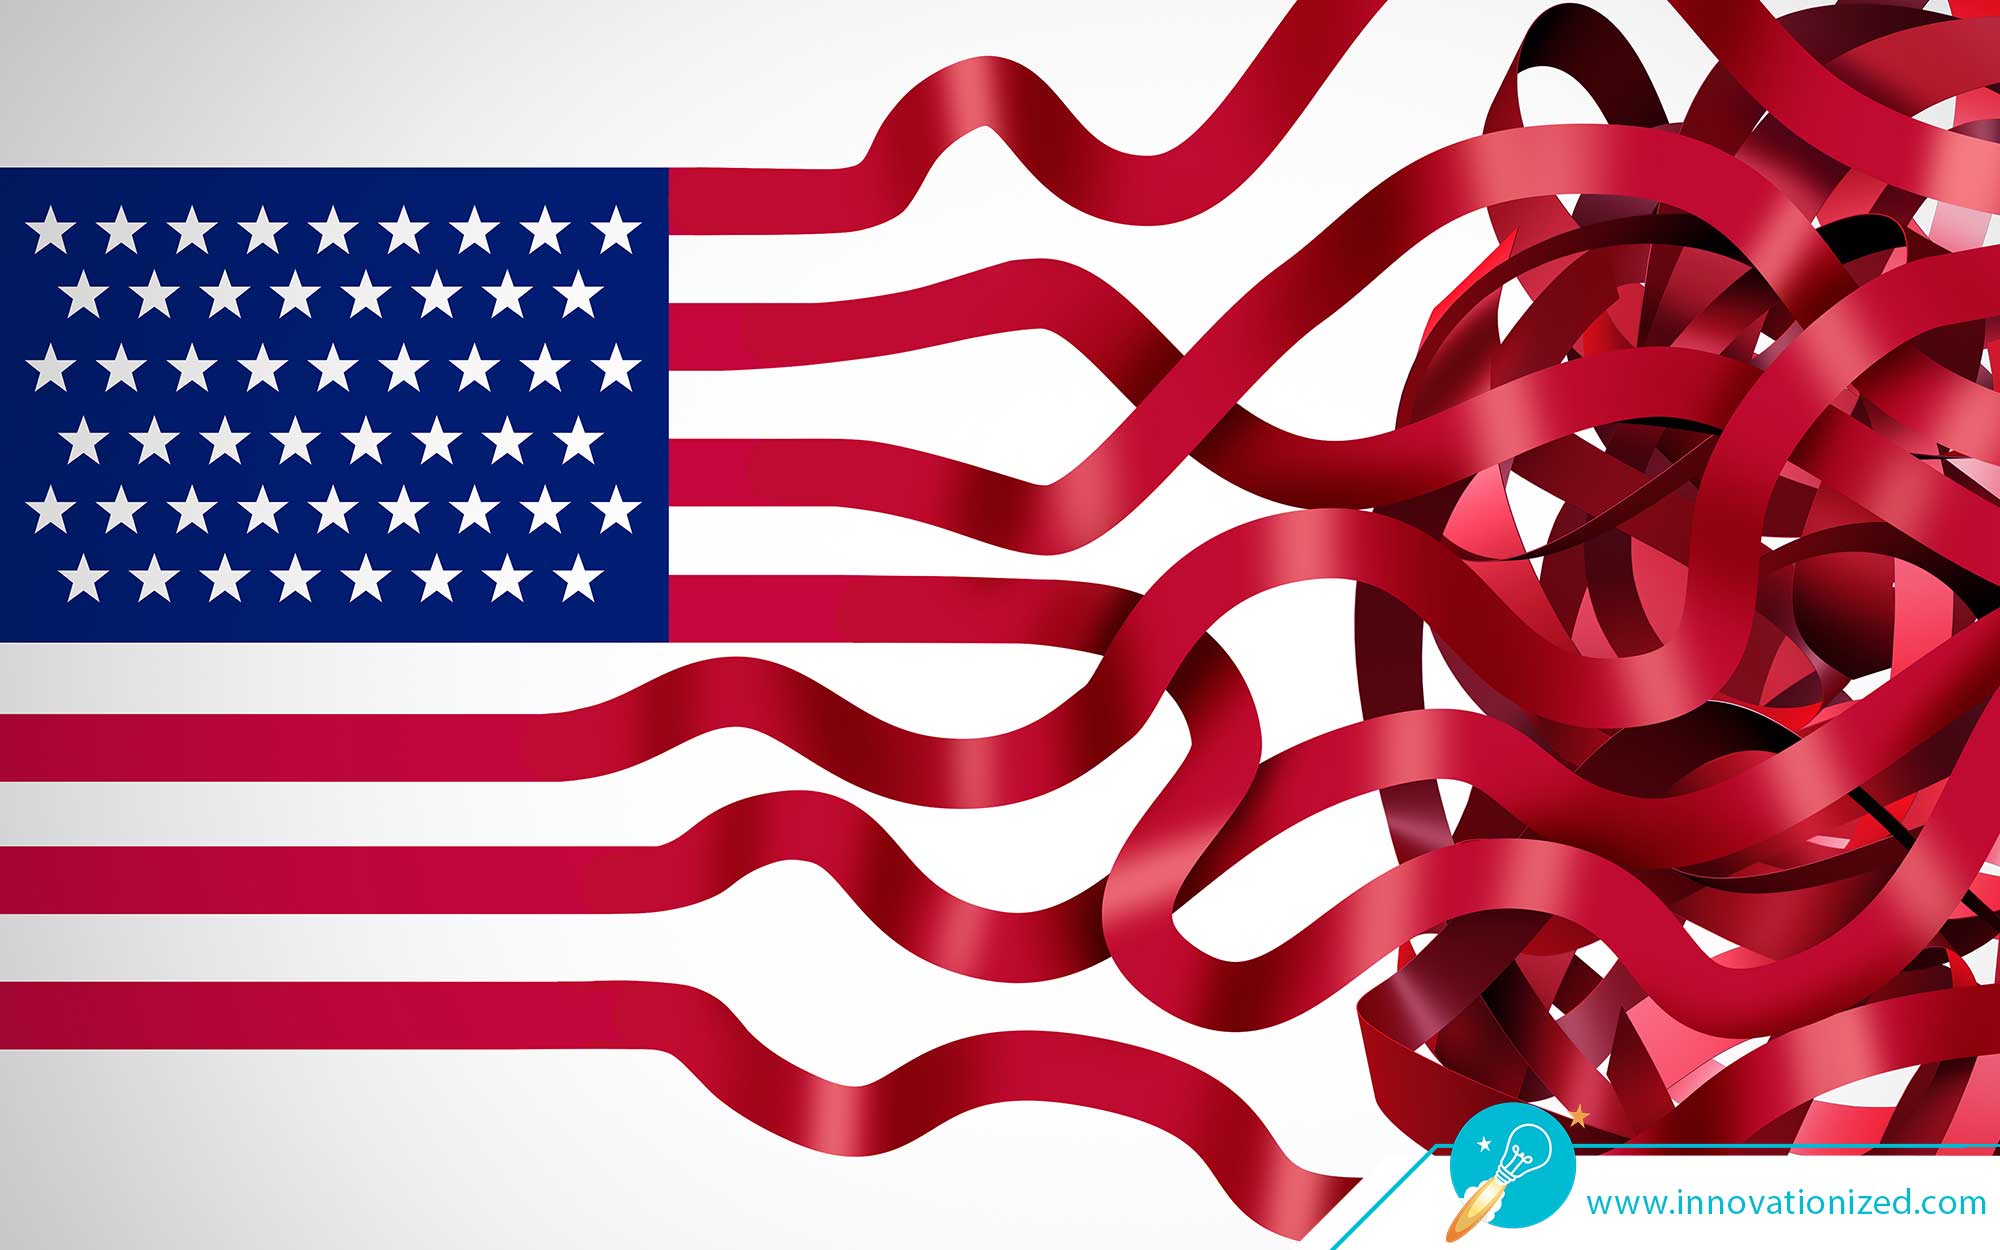 American flag unravels to red tape - How regulation stifles innovation and progress